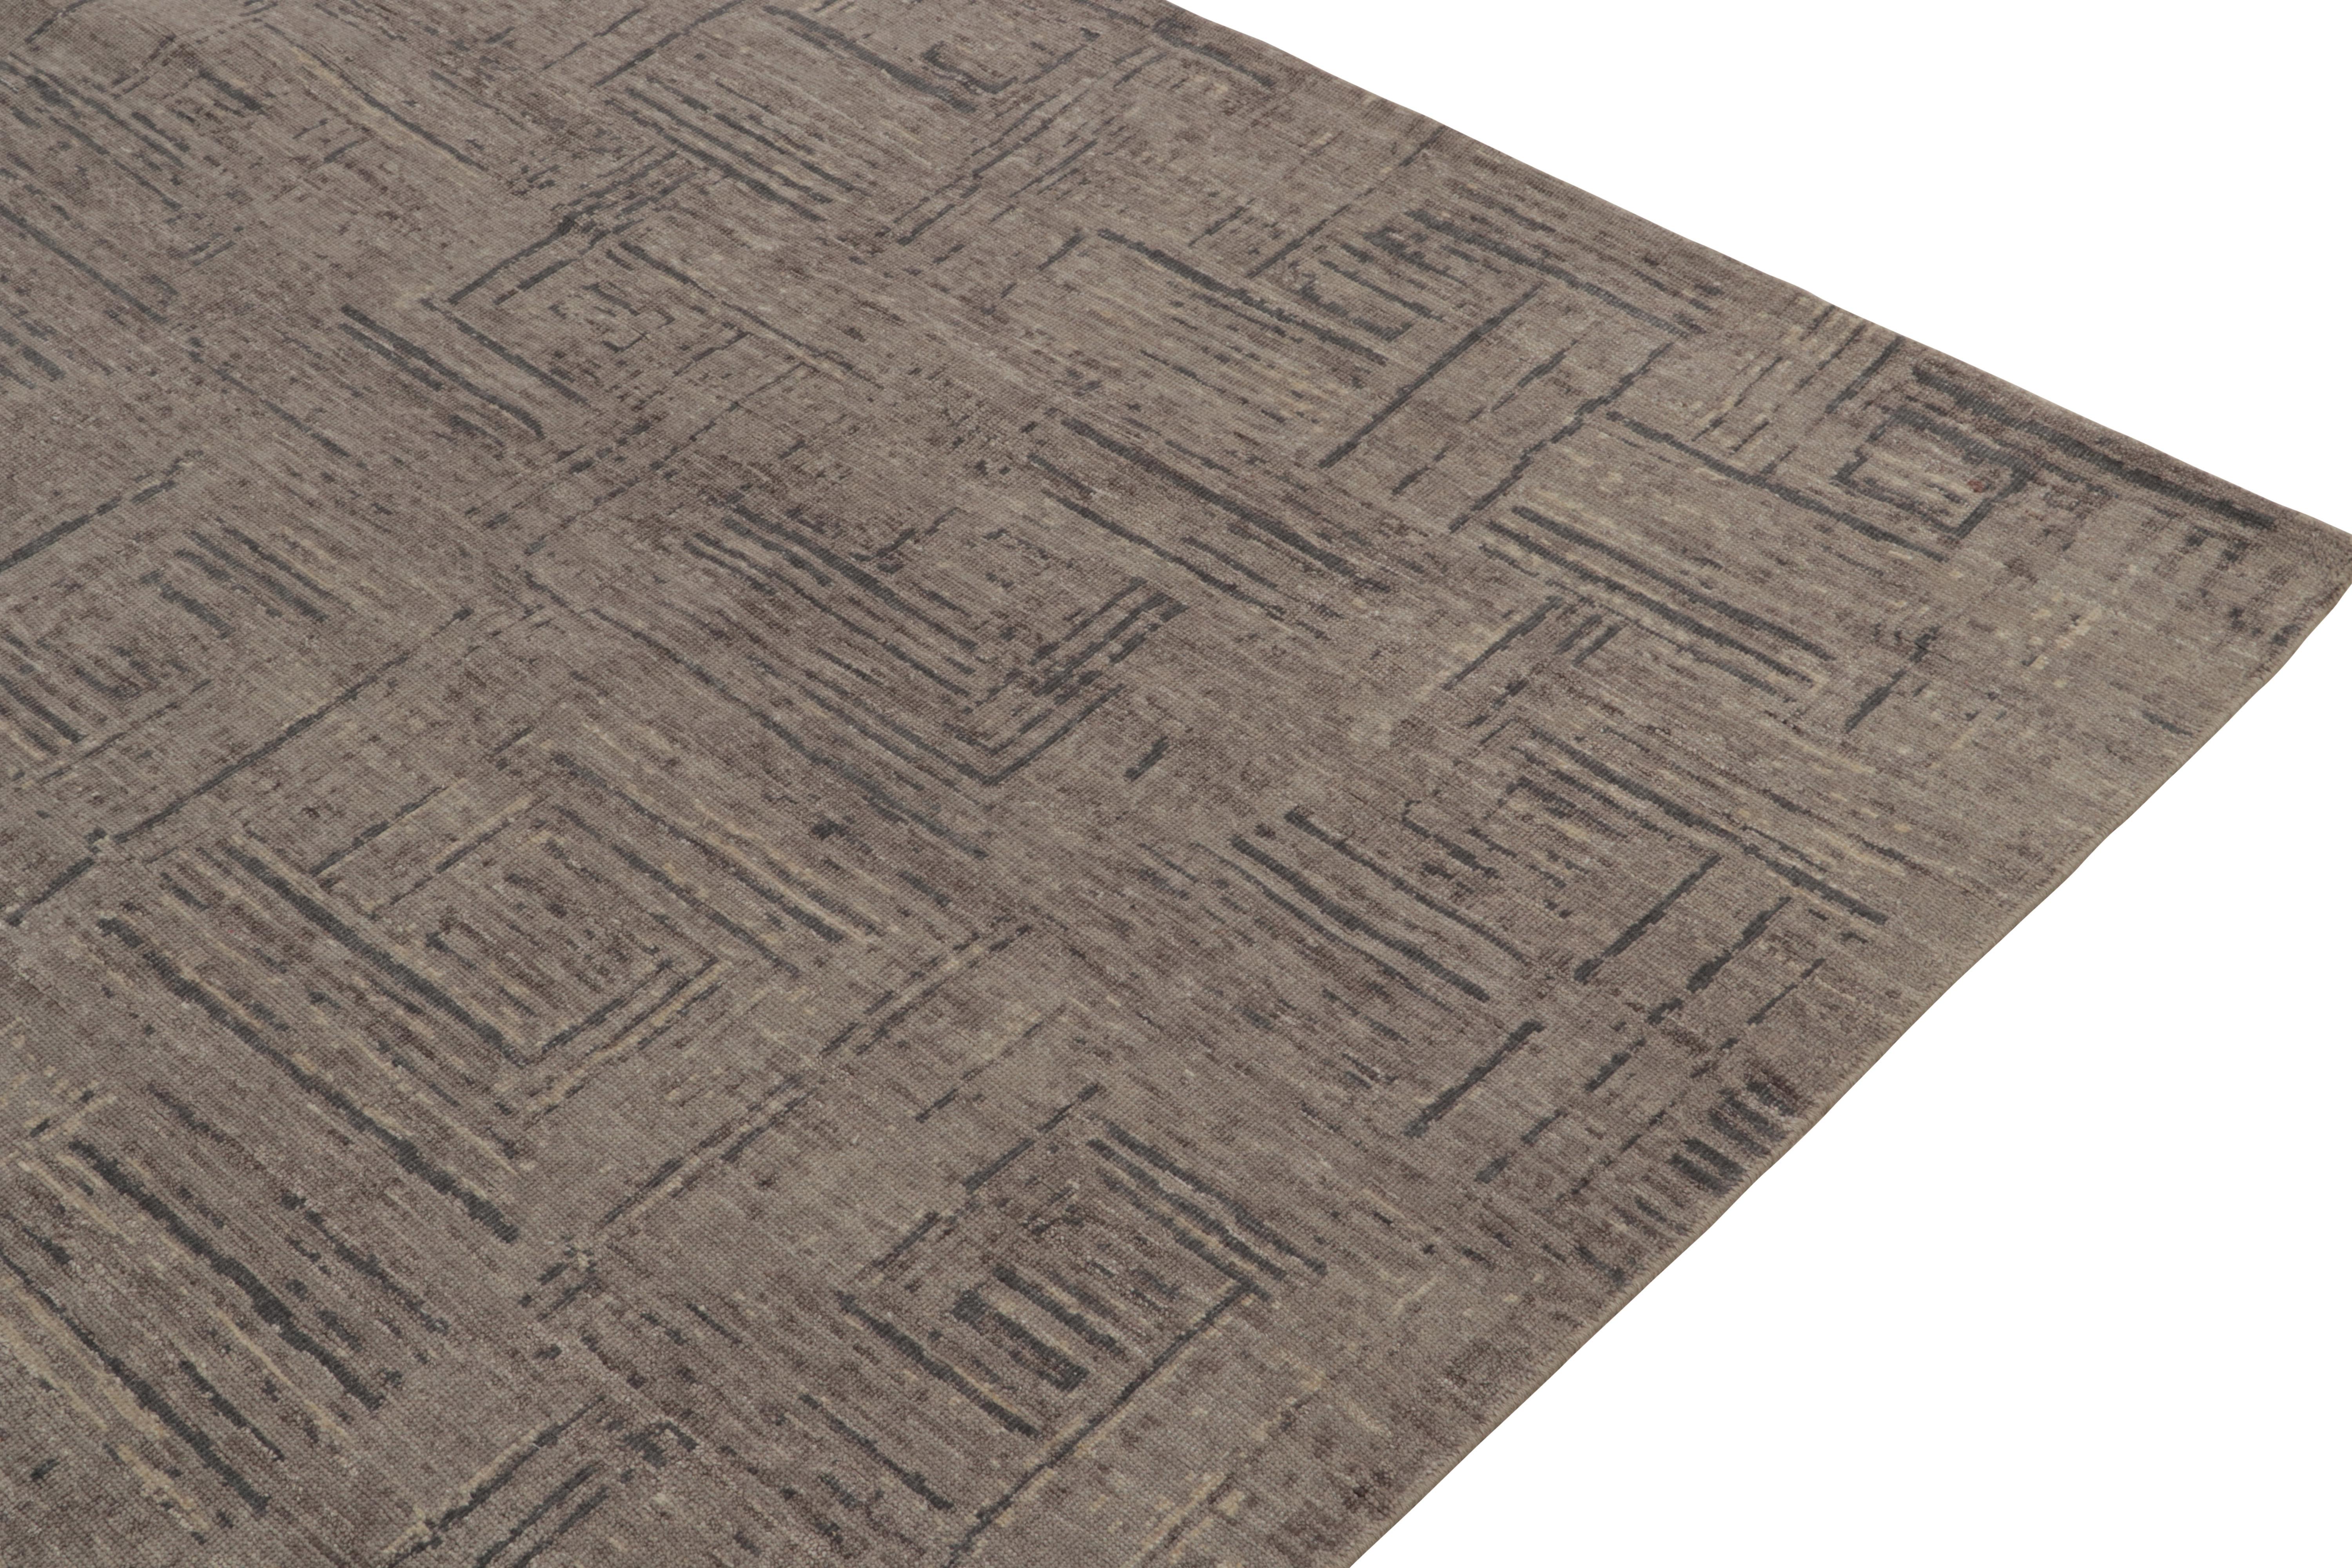 Contemporary Rug & Kilim's Hand-Knotted Abstract Rug in Gray, Beige-Brown Geometric Pattern For Sale